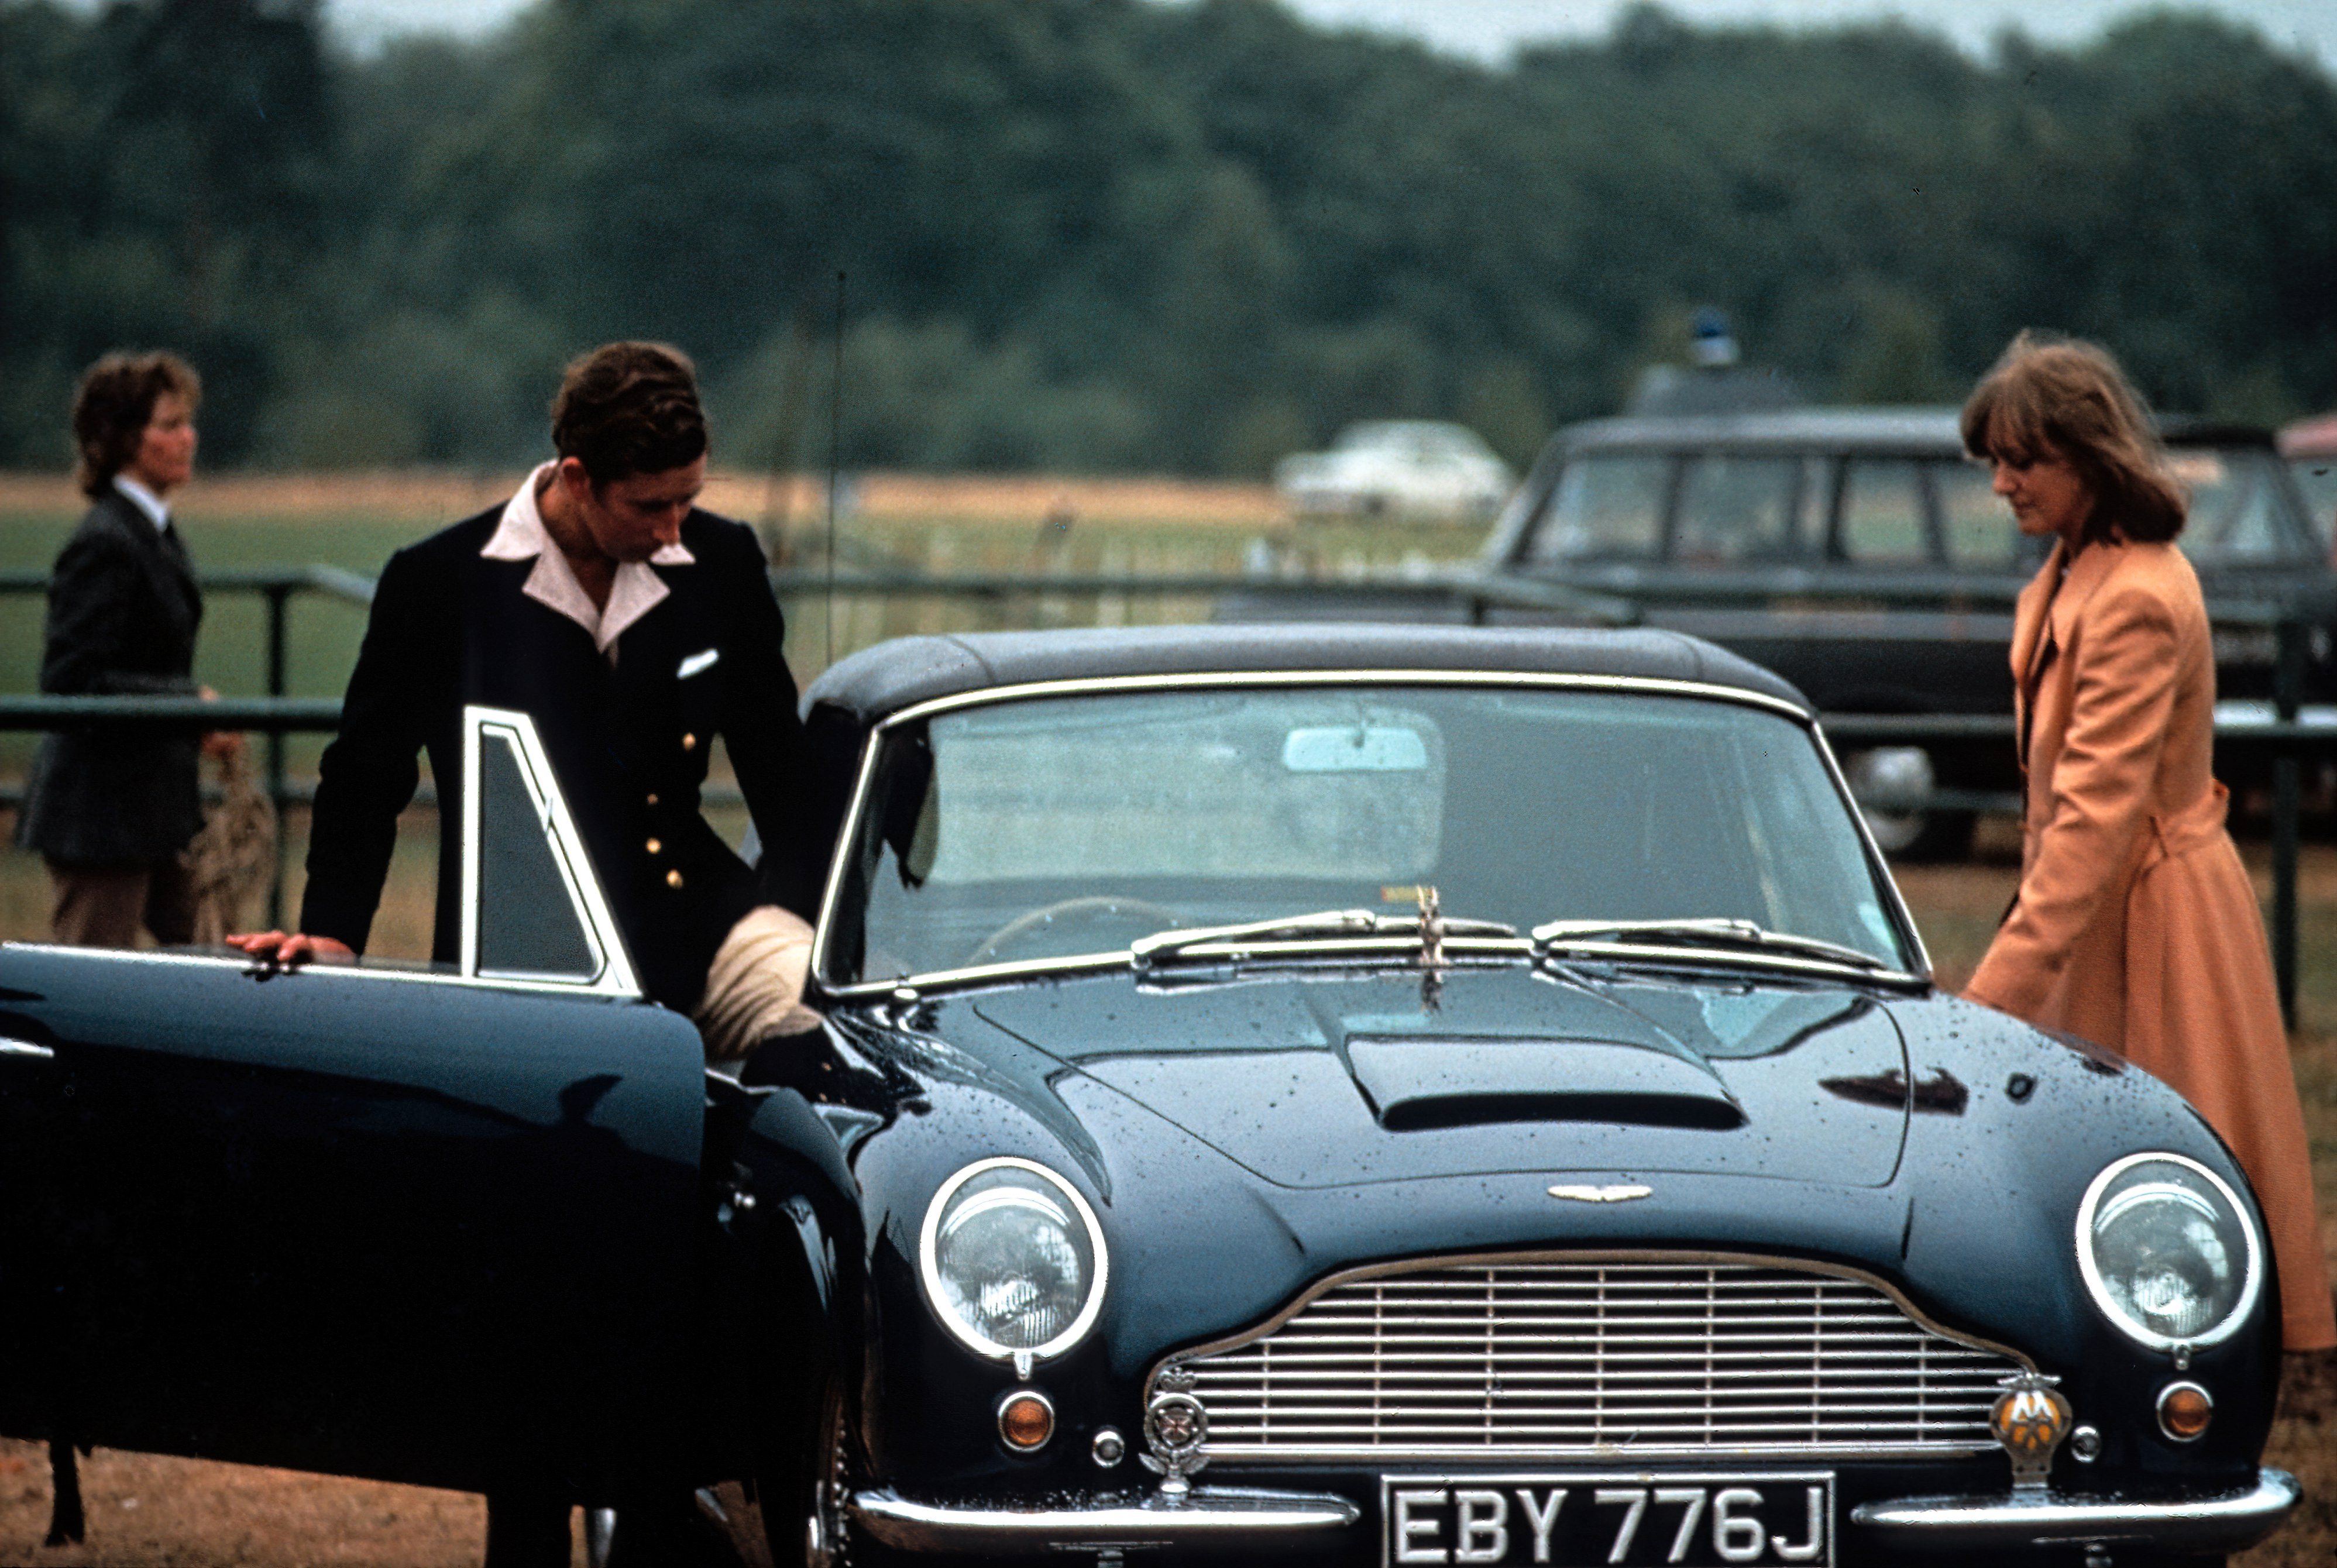 Prince Charles &amp;amp; A Woman Get Into His Car